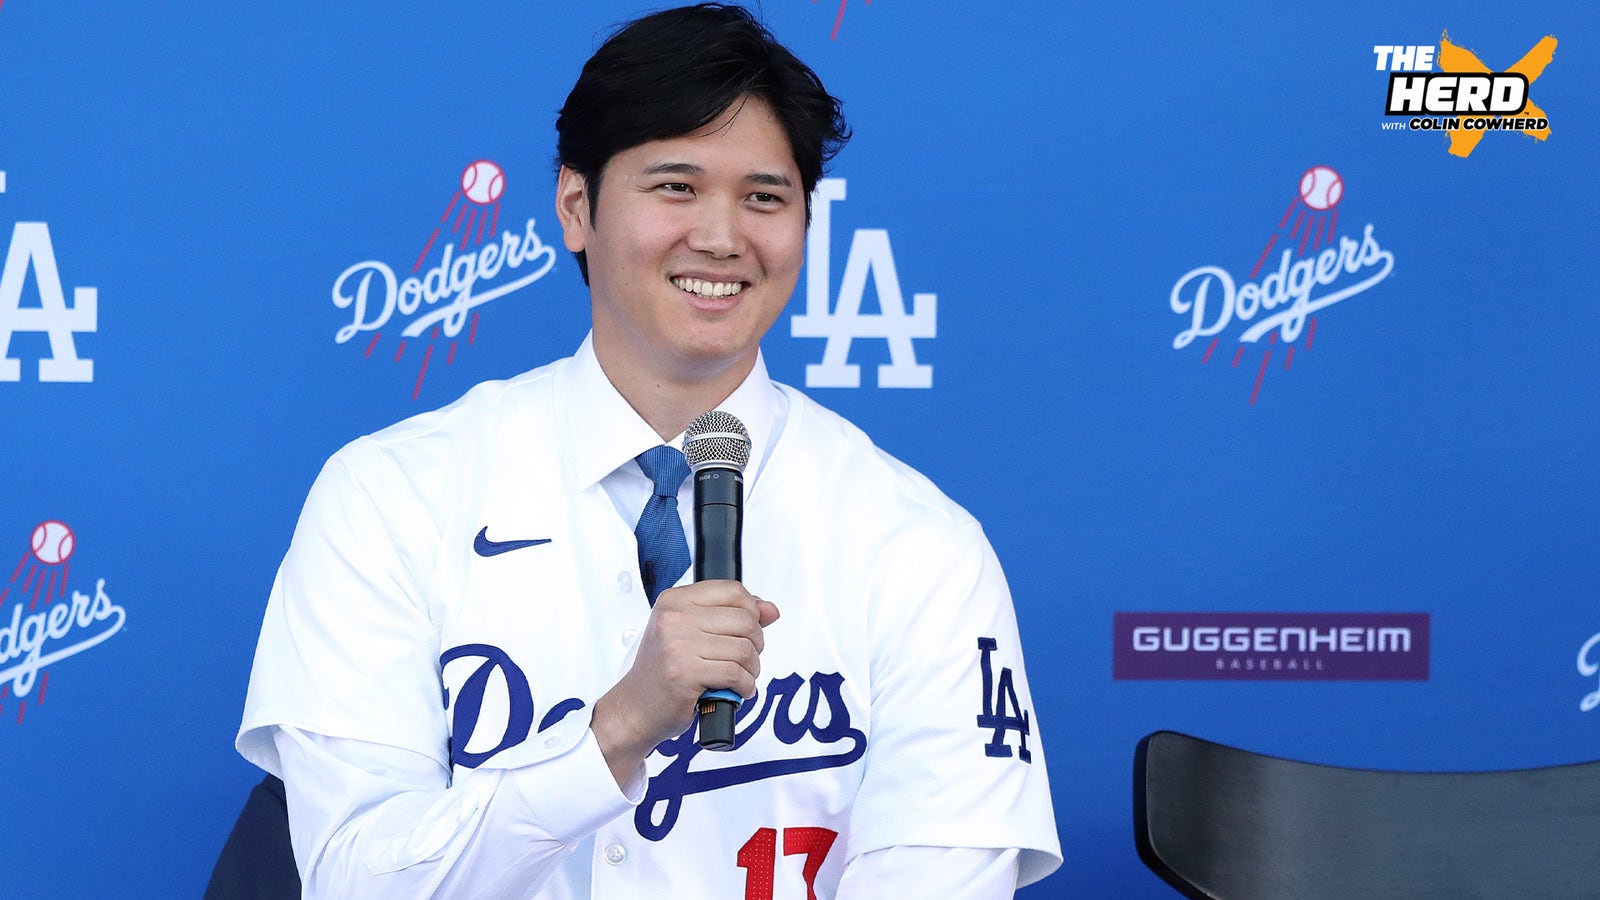 Will Dodgers win a World Series with Shohei Ohtani?